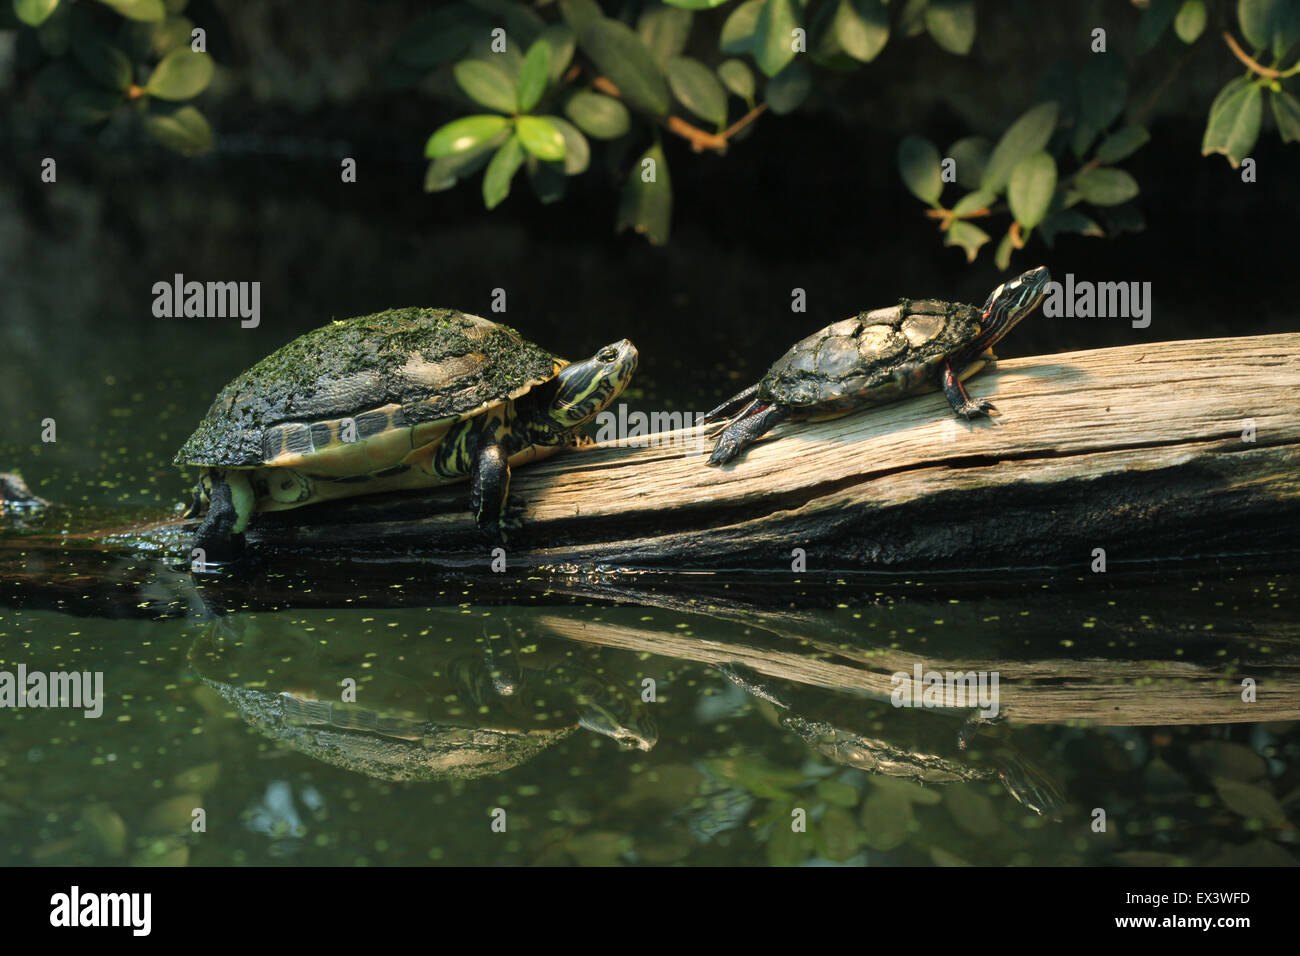 River cooter (Pseudemys concinna hieroglyphica) and Eastern painted turtle (Chrysemys picta picta) at Frankfurt Zoo, Germany. Stock Photo